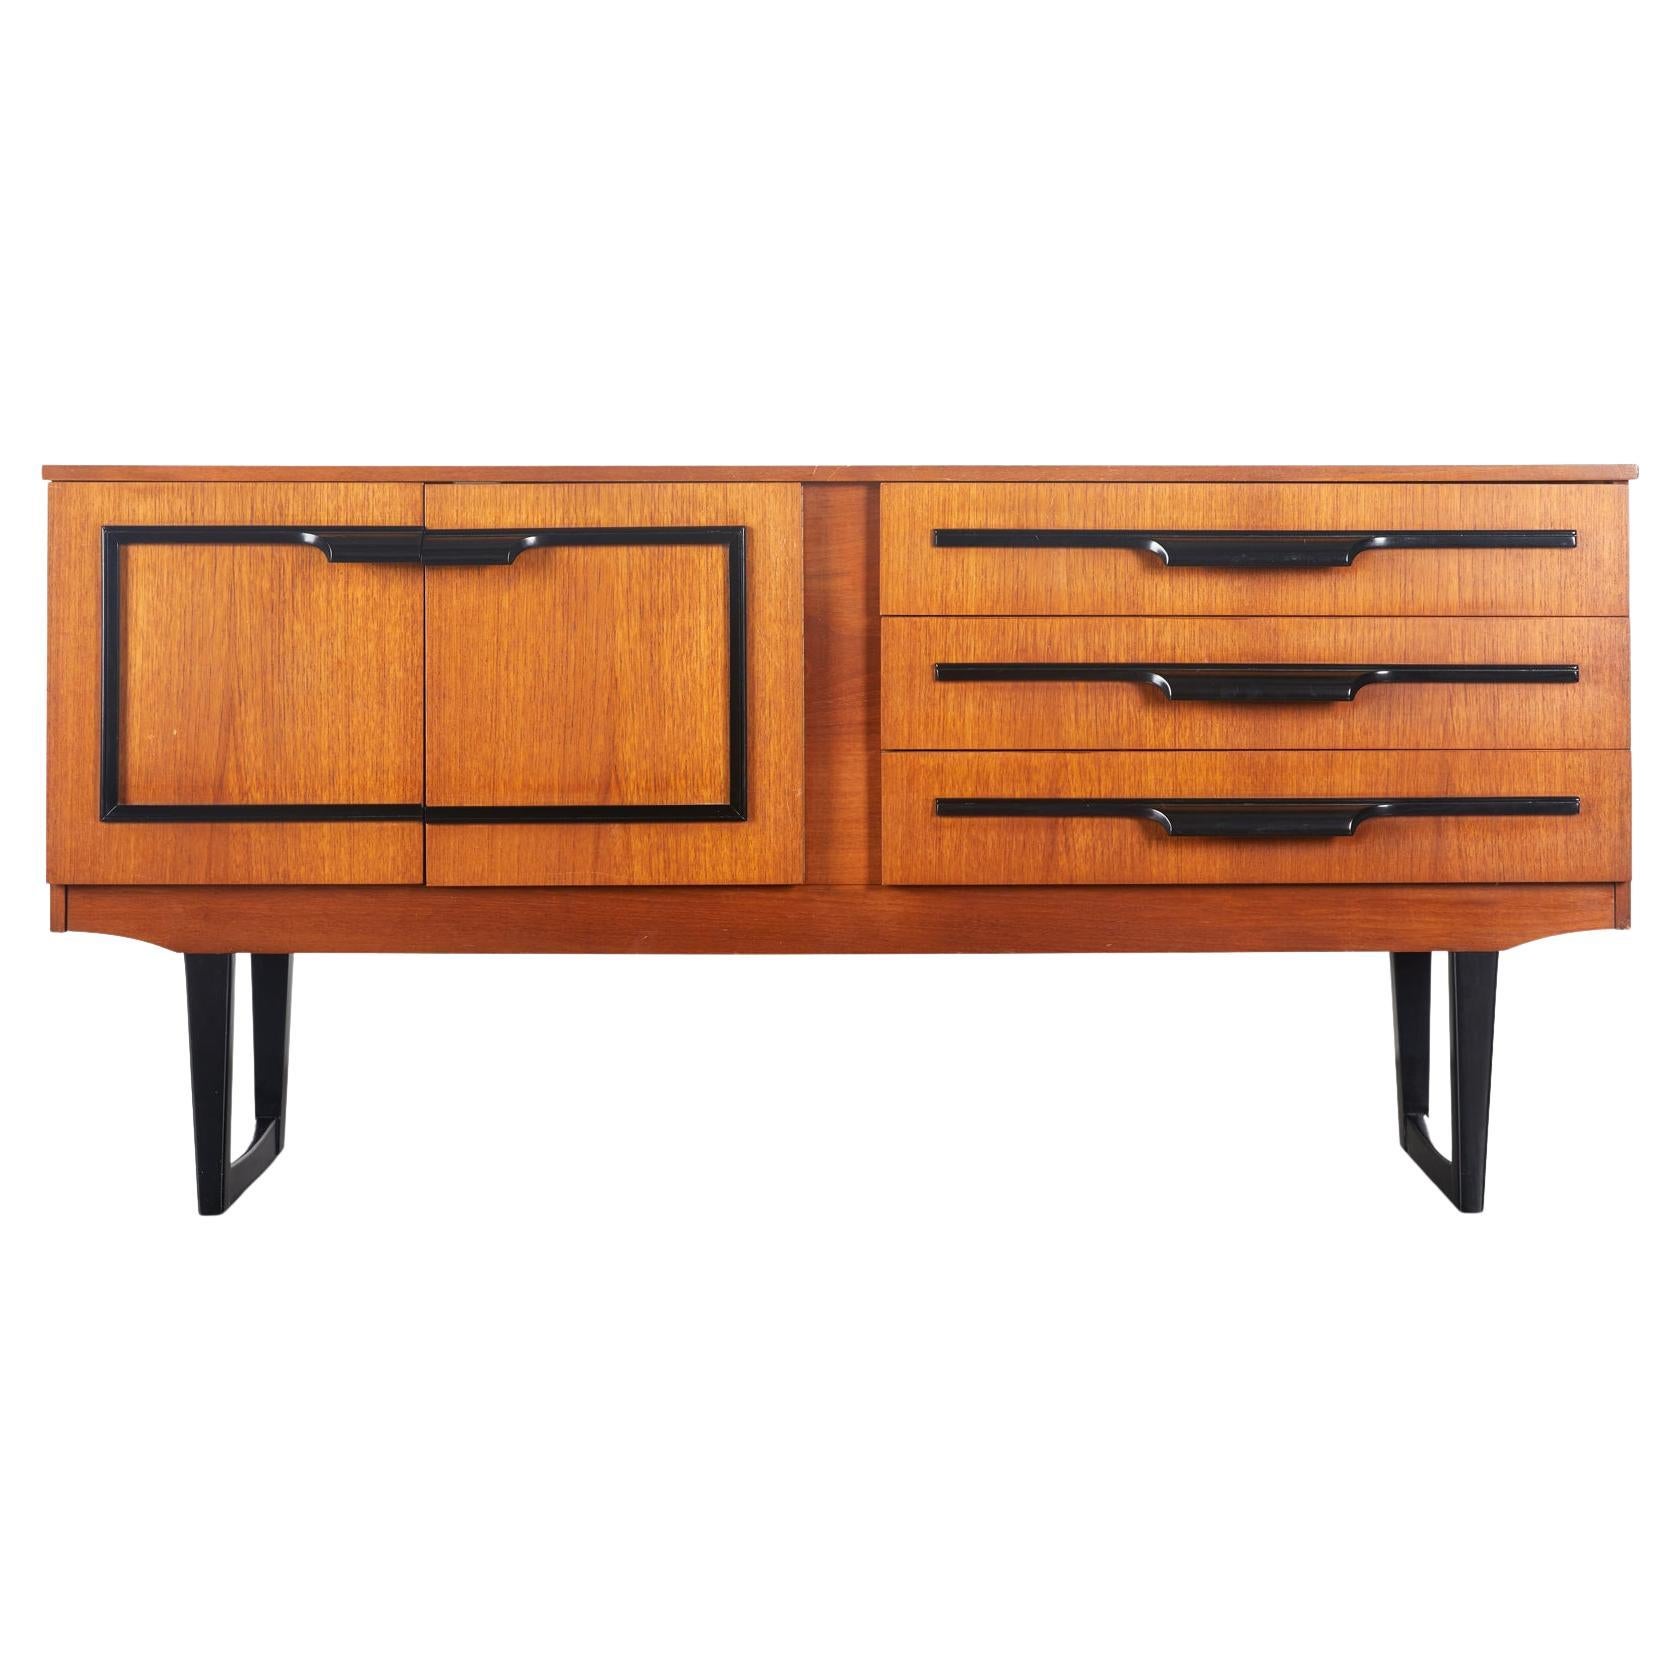 English Modern Midcentury Credenza in Teak with Black Lacquer Accents